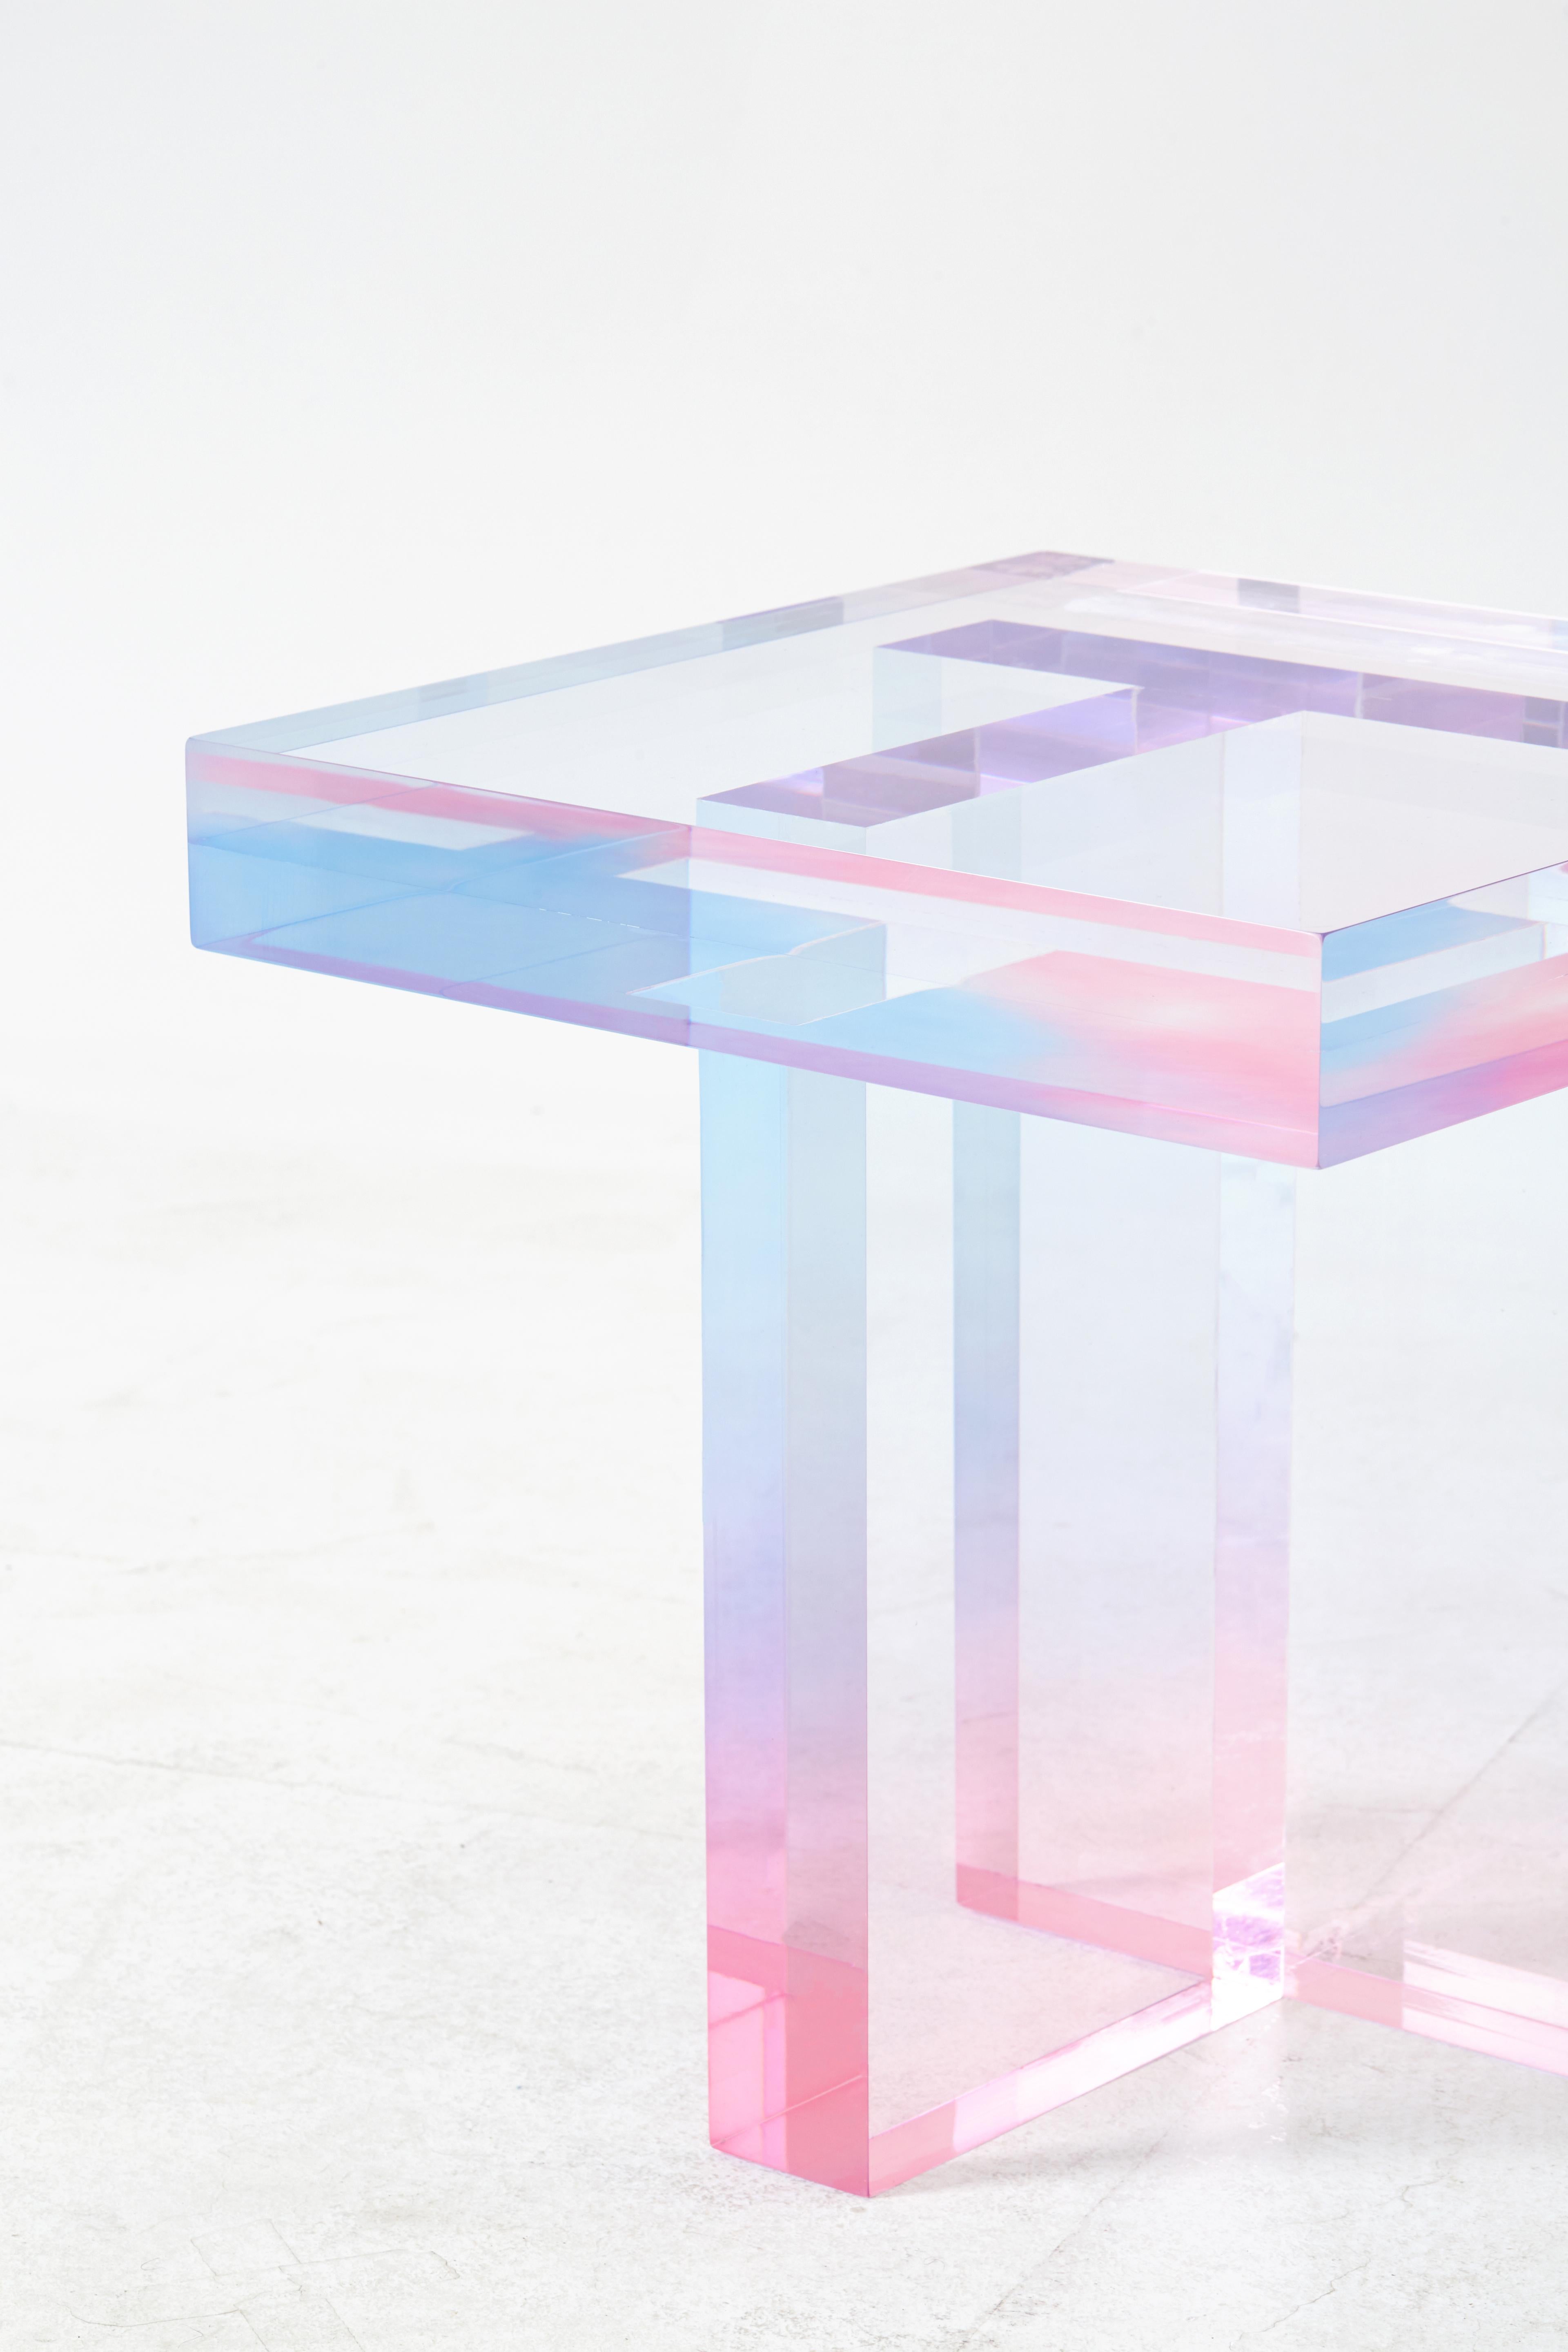 Contemporary Crystal Series Table 01 Acrylic in Transparent Pink and Blue Customized For Sale